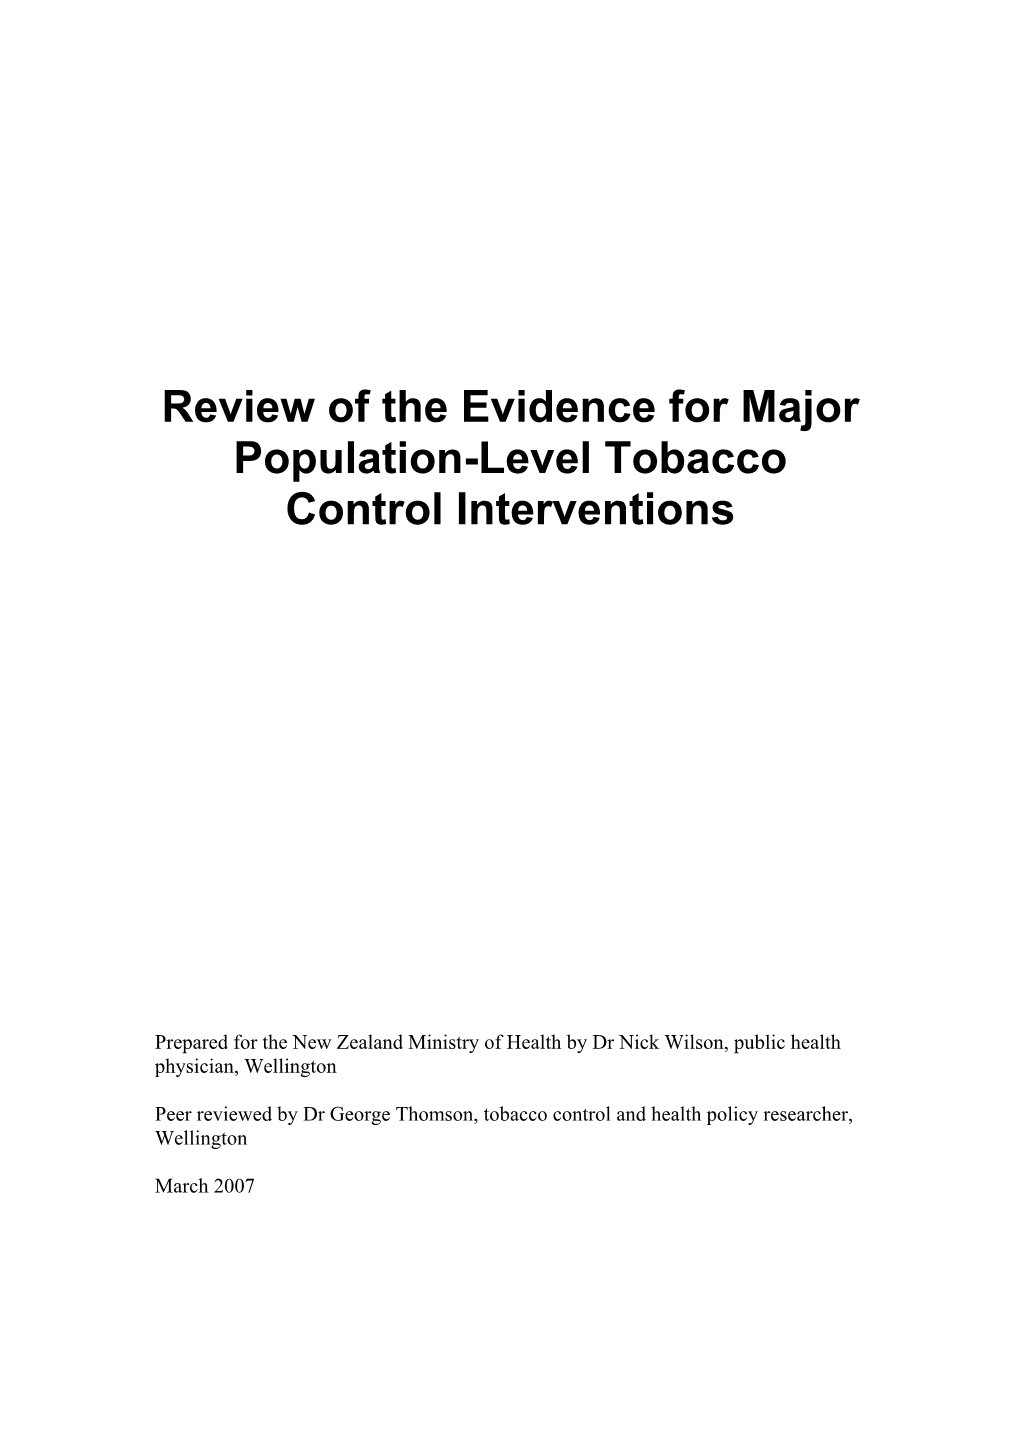 Review of the Evidence for Major Population-Level Tobacco Control Interventions